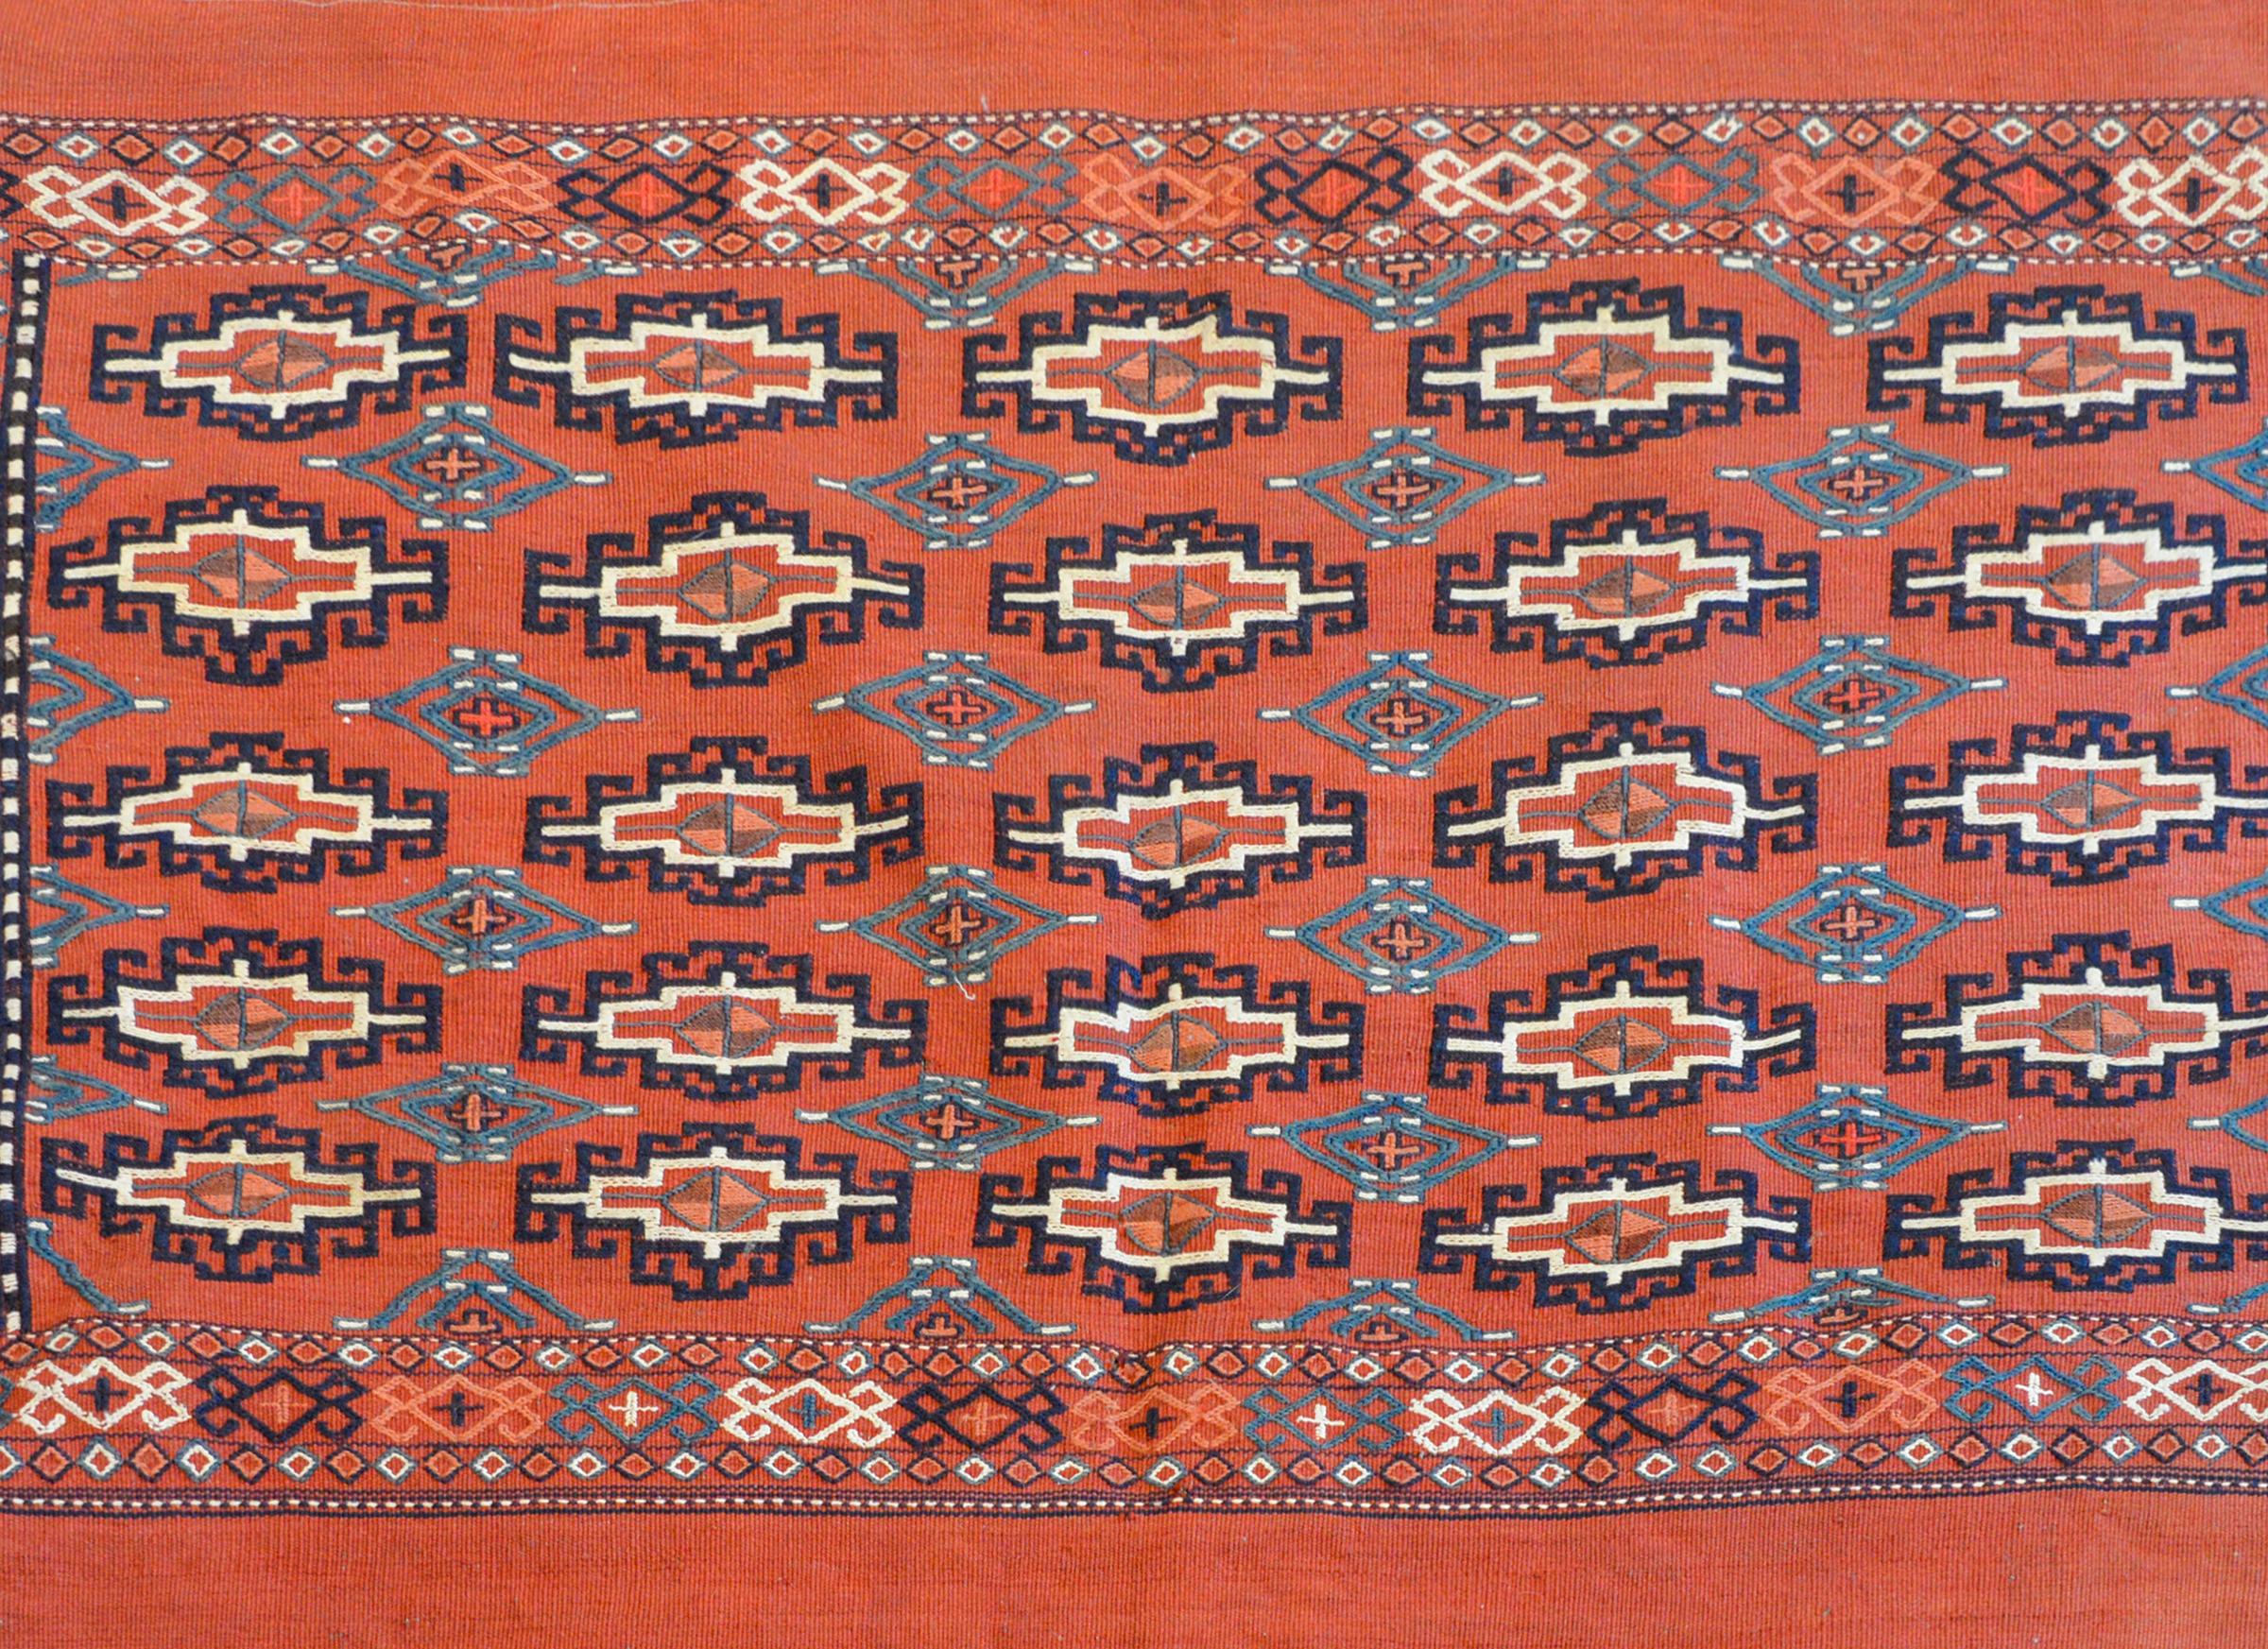 A wonderful early 20th century Persian Turkoman flat-weave bag face with embroidered diamonds and across the field woven in teal, indigo, white, orange, and green wool on a scarlet background.